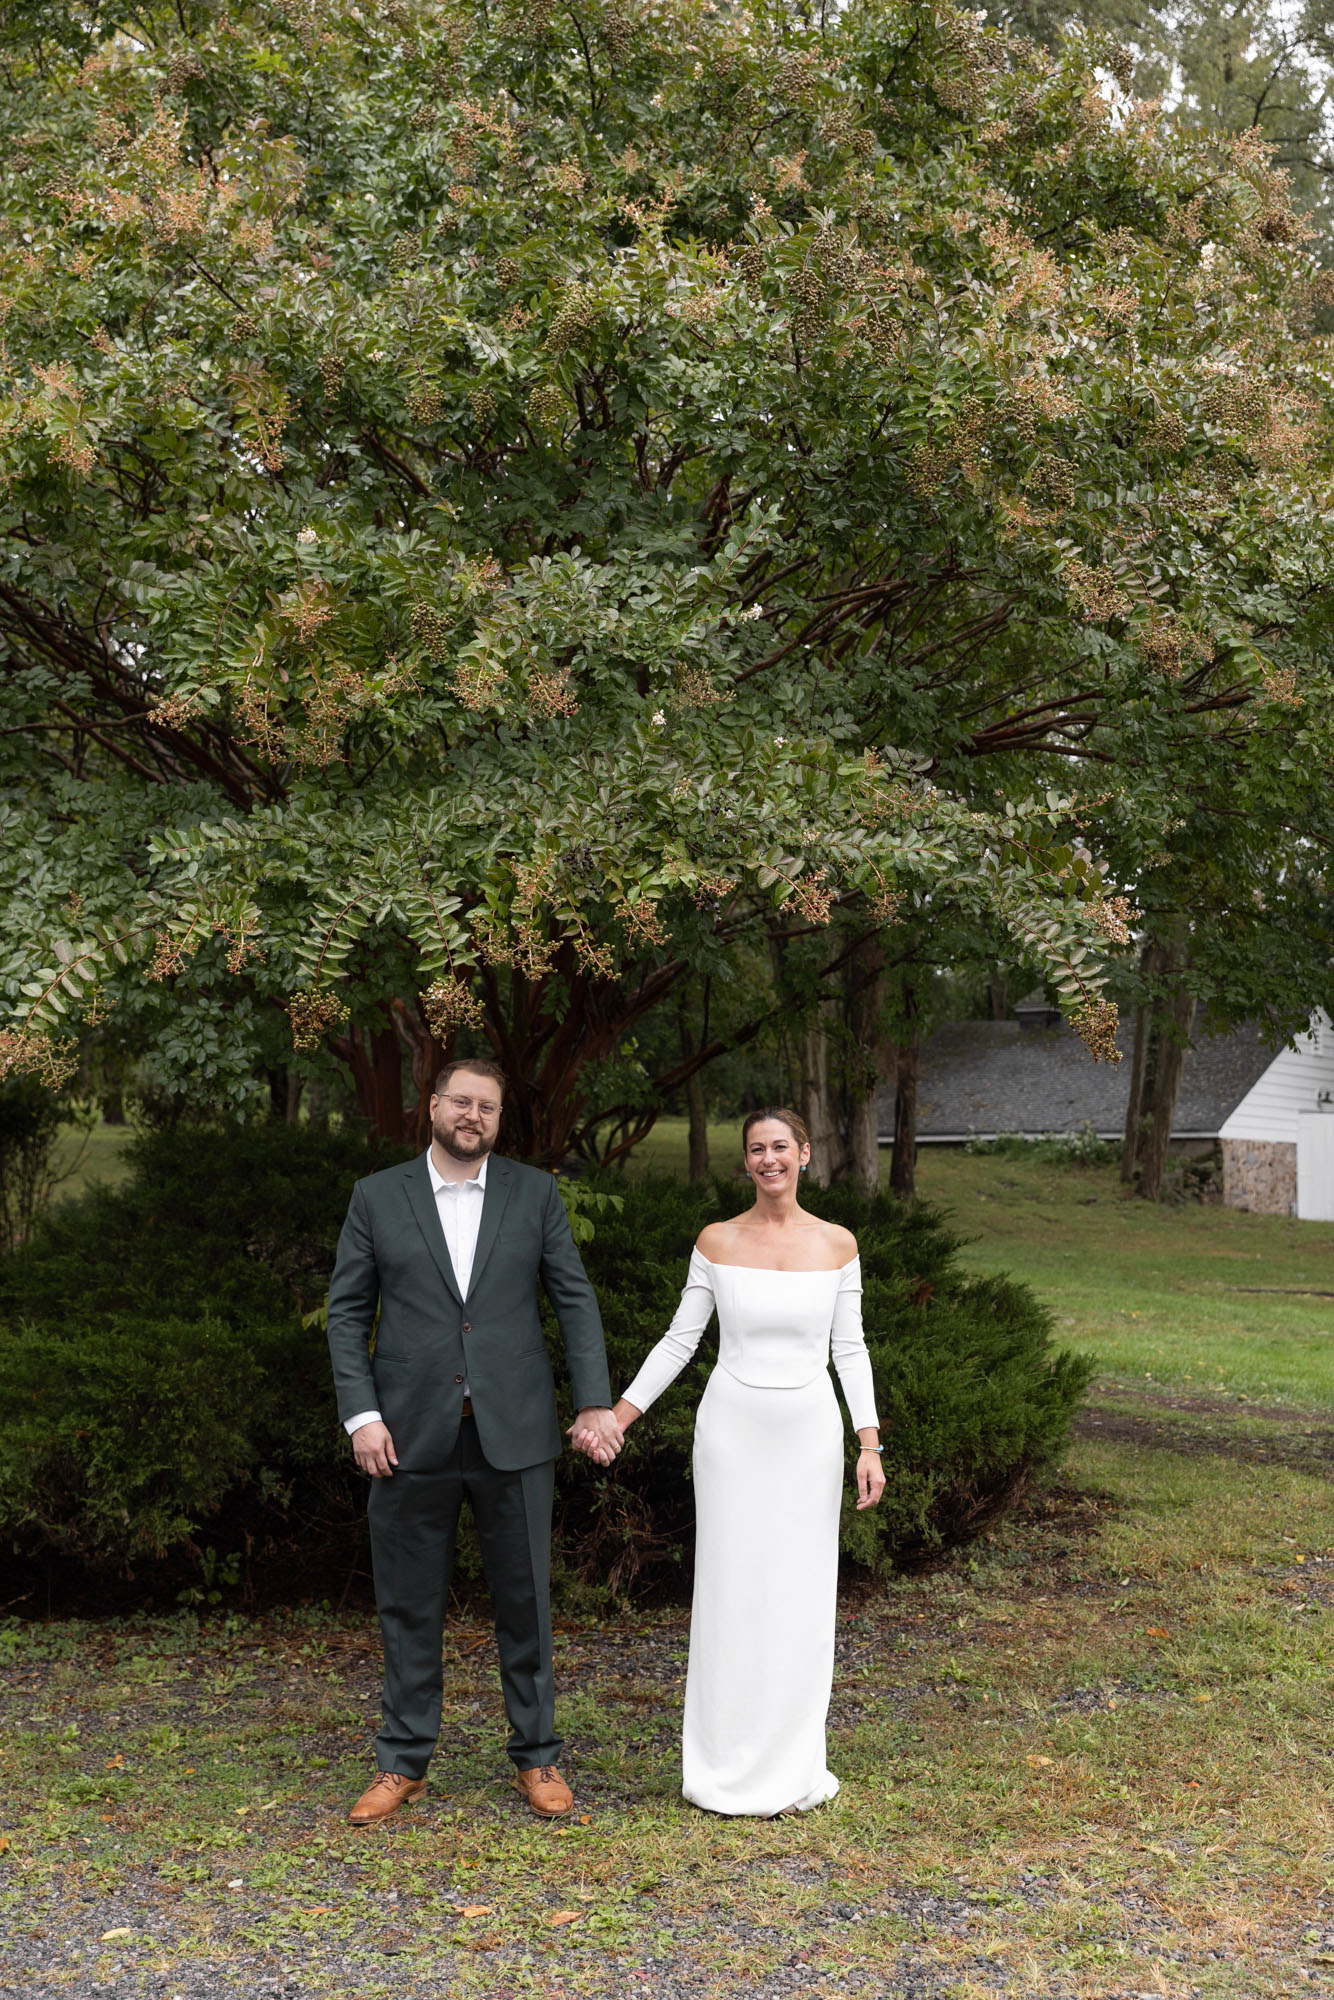 An elegant bride in an elegant modern sheath dress and groom in a dark green suit hold hands after their wedding ceremony at Chimney Hill Estate Inn in Lambertville, NJ